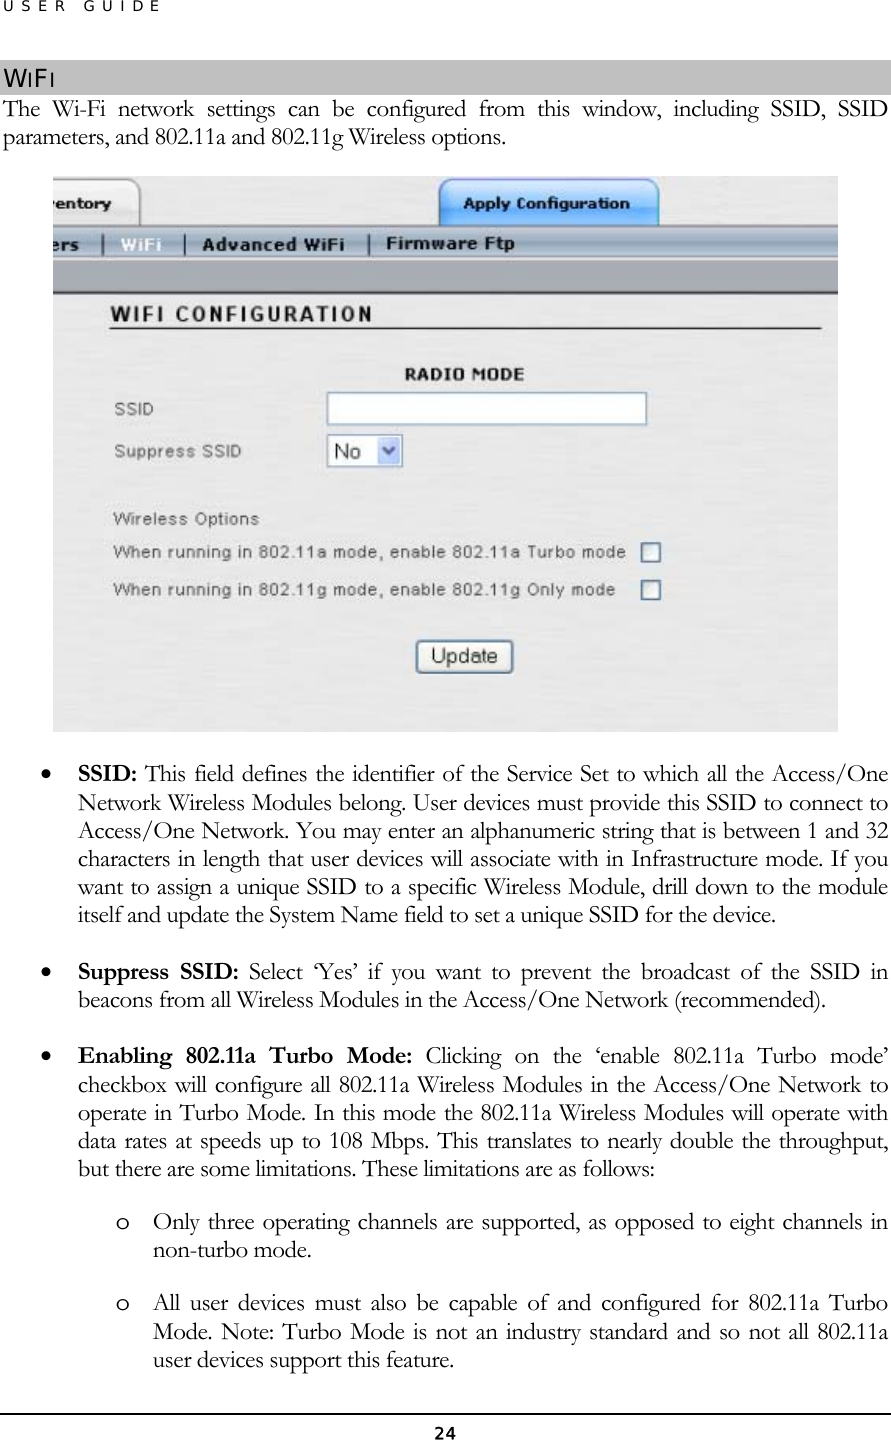 USER GUIDE WIFI The Wi-Fi network settings can be configured from this window, including SSID, SSID parameters, and 802.11a and 802.11g Wireless options.  •  SSID: This field defines the identifier of the Service Set to which all the Access/One Network Wireless Modules belong. User devices must provide this SSID to connect to Access/One Network. You may enter an alphanumeric string that is between 1 and 32 characters in length that user devices will associate with in Infrastructure mode. If you want to assign a unique SSID to a specific Wireless Module, drill down to the module itself and update the System Name field to set a unique SSID for the device. •  Suppress SSID: Select ‘Yes’ if you want to prevent the broadcast of the SSID in beacons from all Wireless Modules in the Access/One Network (recommended). •  Enabling 802.11a Turbo Mode: Clicking on the ‘enable 802.11a Turbo mode’ checkbox will configure all 802.11a Wireless Modules in the Access/One Network to operate in Turbo Mode. In this mode the 802.11a Wireless Modules will operate with data rates at speeds up to 108 Mbps. This translates to nearly double the throughput, but there are some limitations. These limitations are as follows: o  Only three operating channels are supported, as opposed to eight channels in non-turbo mode. o  All user devices must also be capable of and configured for 802.11a Turbo Mode. Note: Turbo Mode is not an industry standard and so not all 802.11a user devices support this feature. 24 